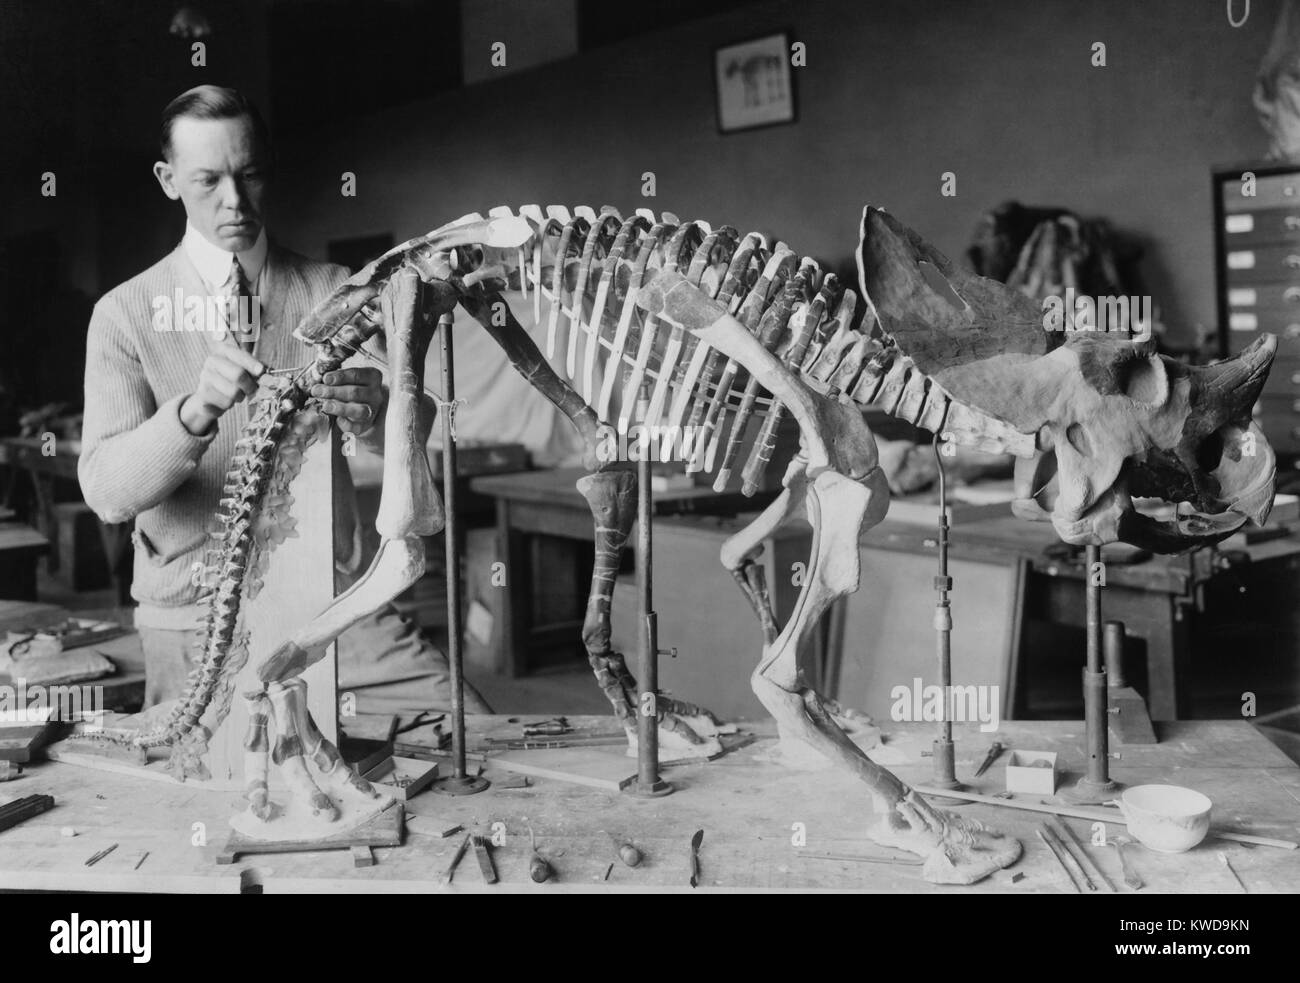 Norman Ross, preparing a baby Brachyceratops skeleton for display at the Smithsonian 1921. The dinosaur fossil was unearthed in Montana and lived seventy or eighty million years ago (BSLOC 2016 10 23) Stock Photo